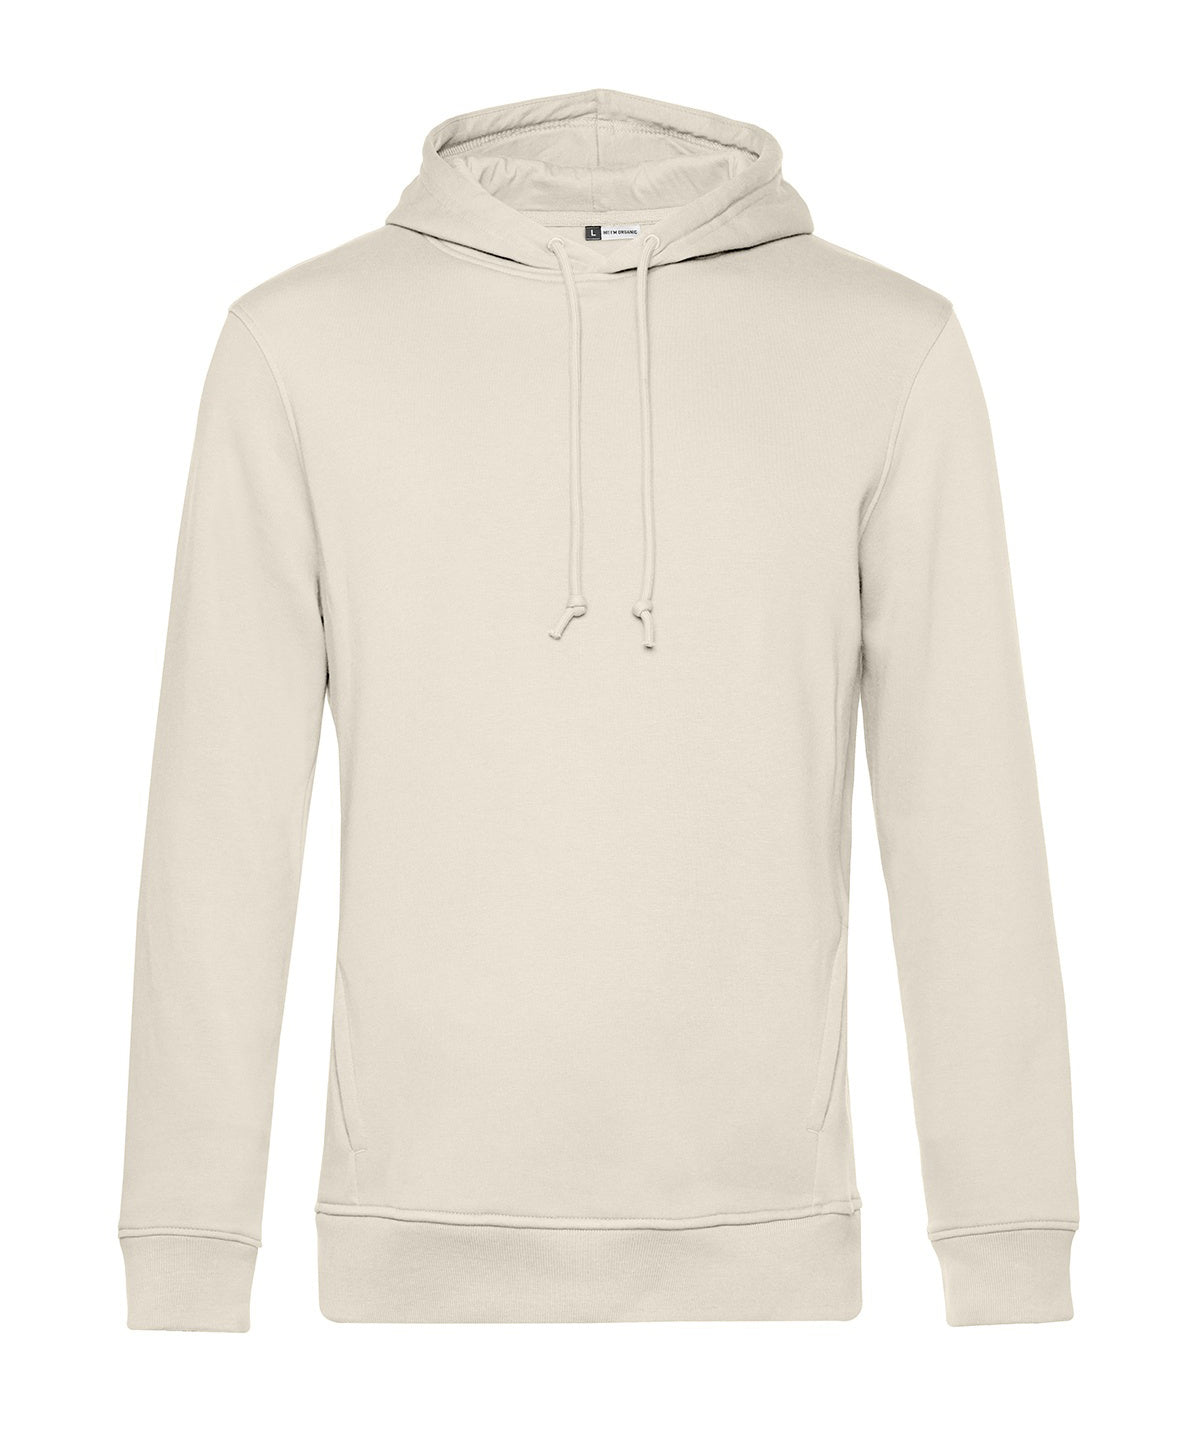 B&C Collection Inspire Hooded